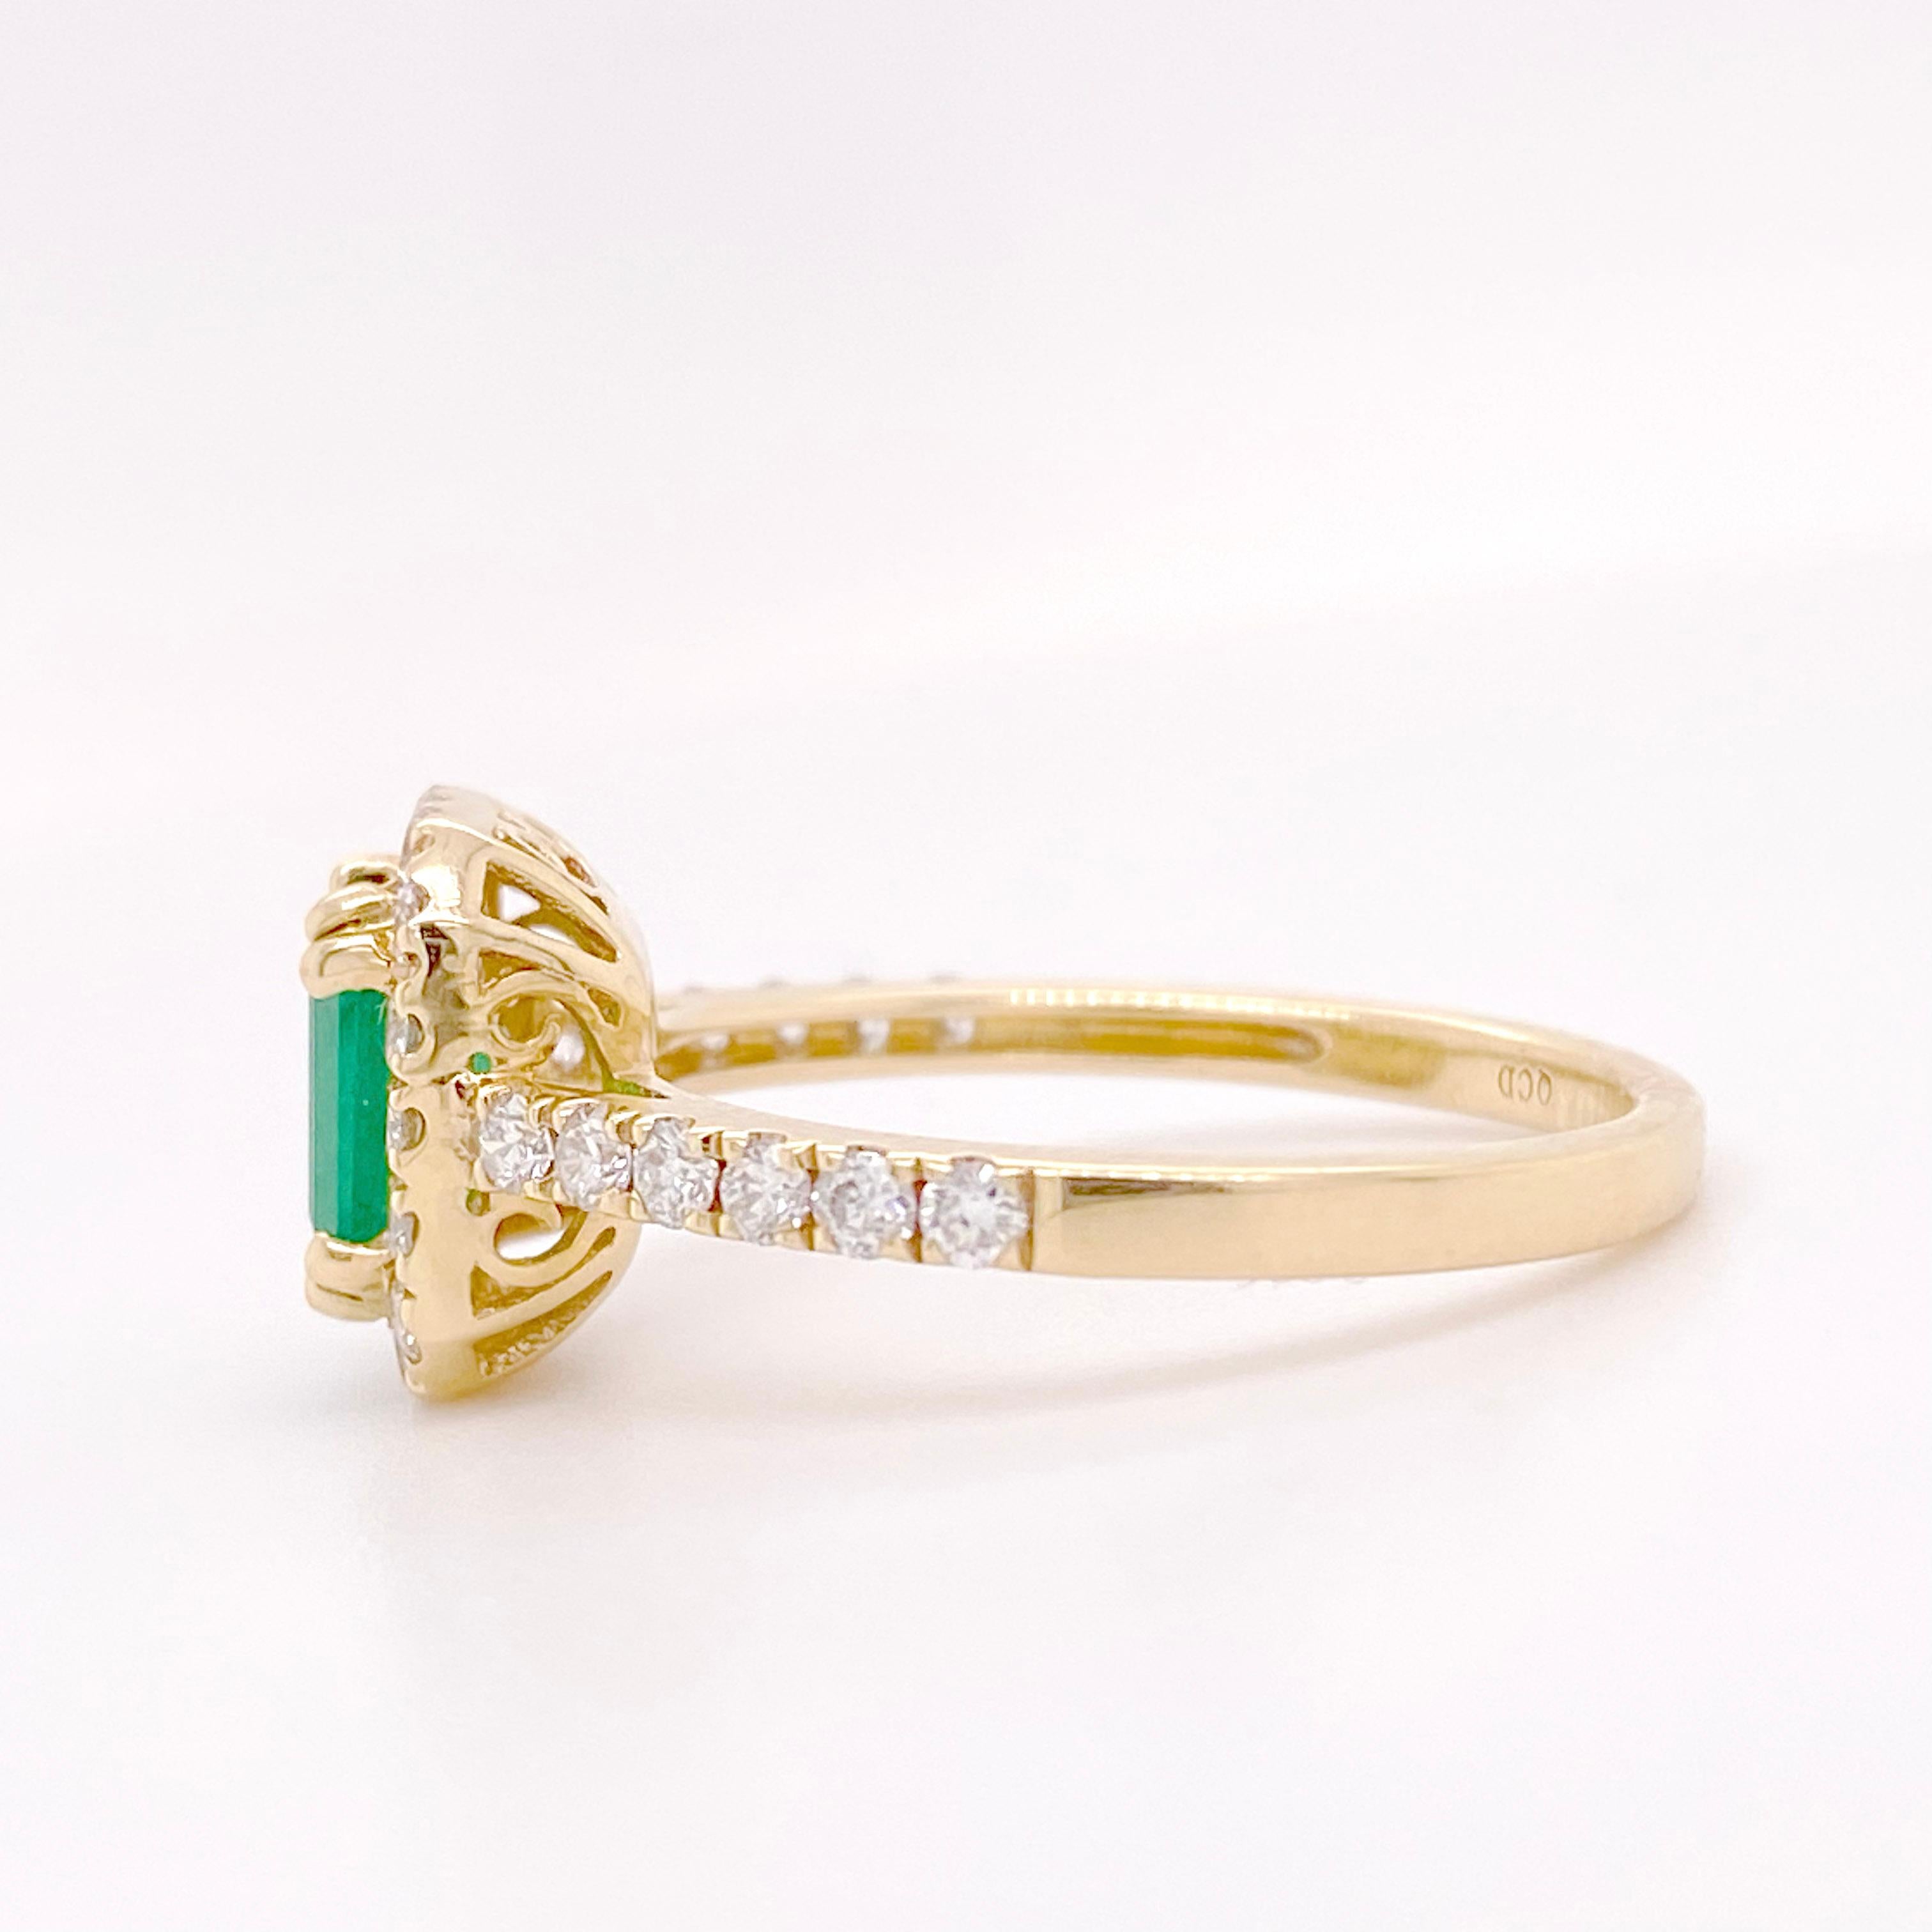 Emerald and Diamond Engagement Ring

The emerald gemstone is the 